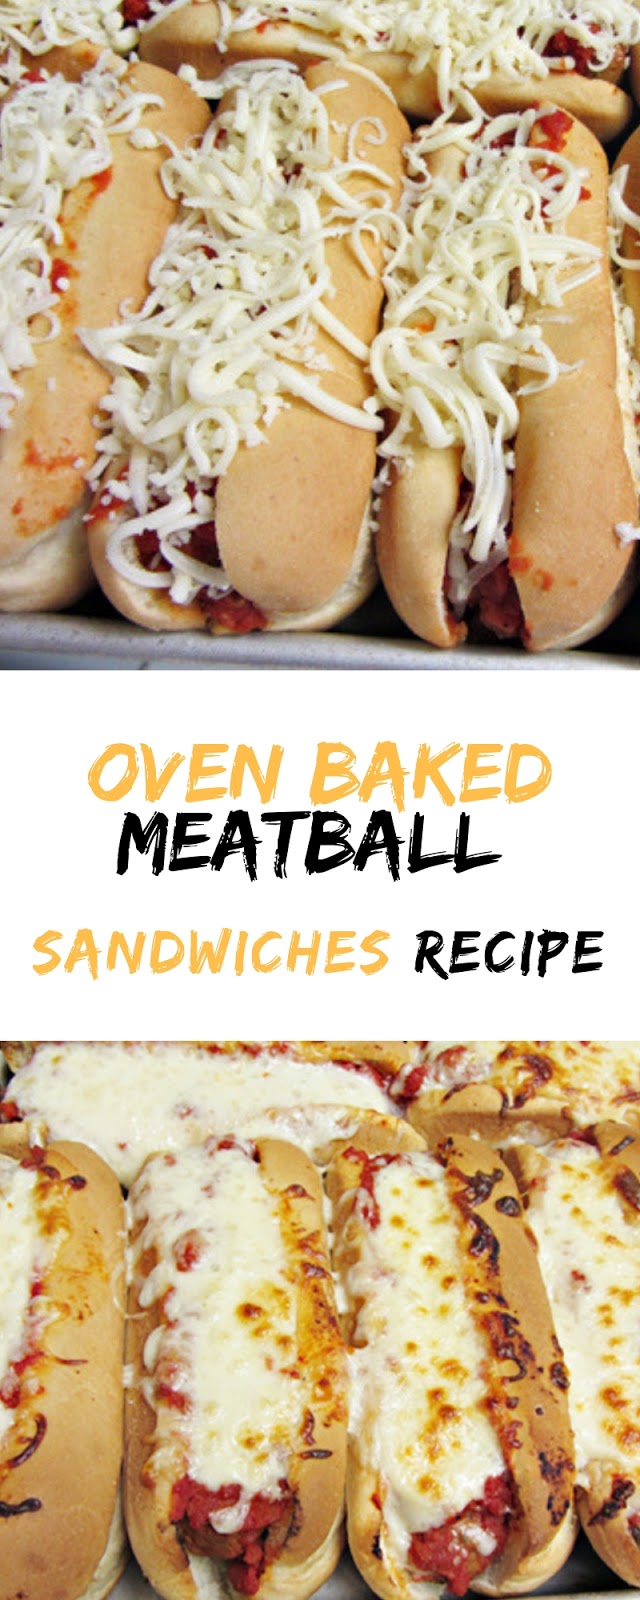 Oven Baked Meatball Sandwiches Recipes | Delicious My Food